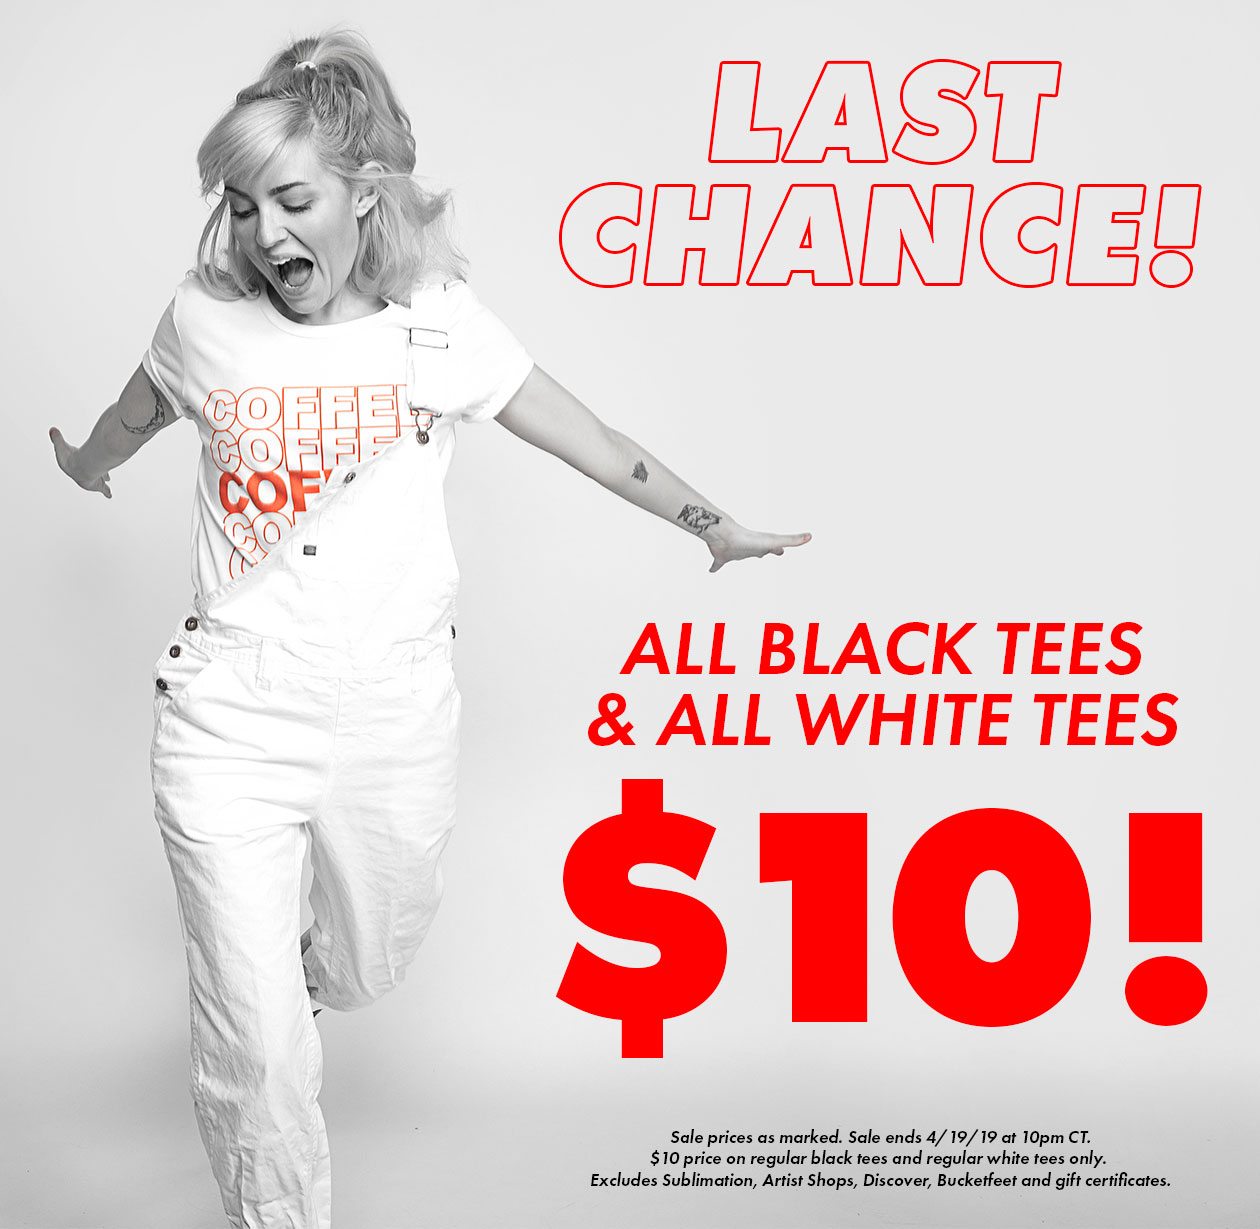 Last Chance for $10 Tees!